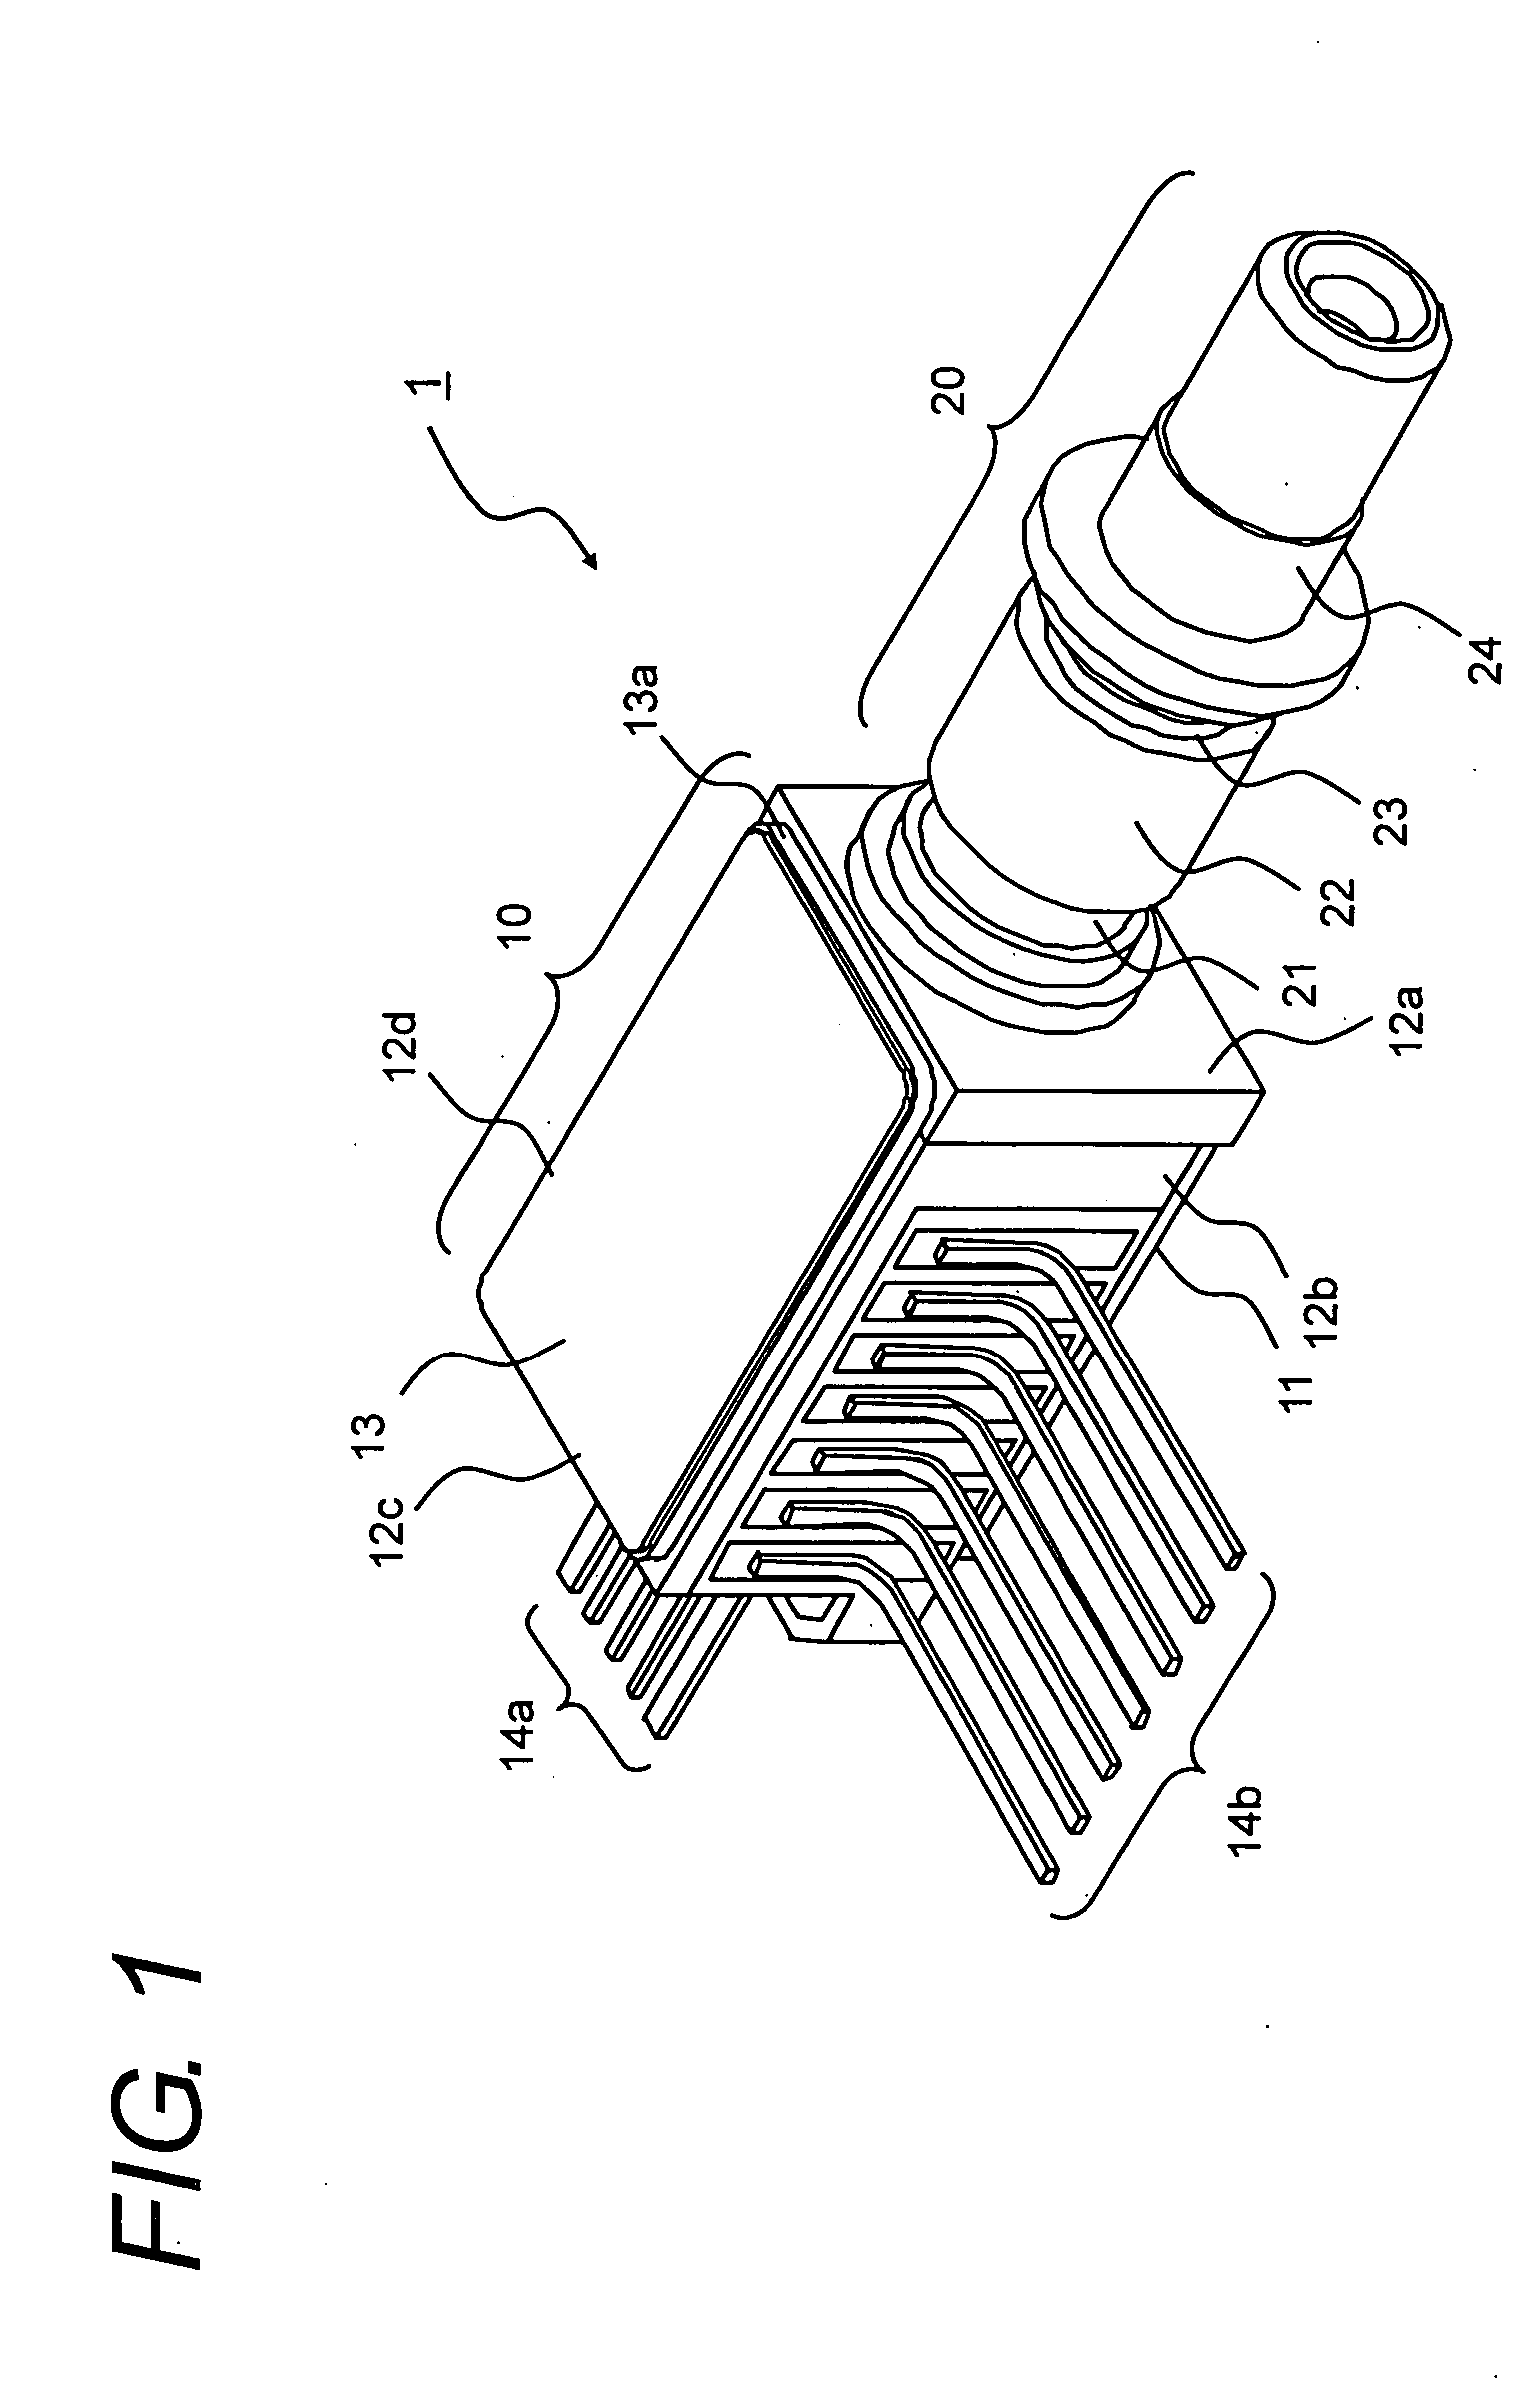 Method for manufacturing a transmitting optical sub-assembly with a thermo-electric cooler therein